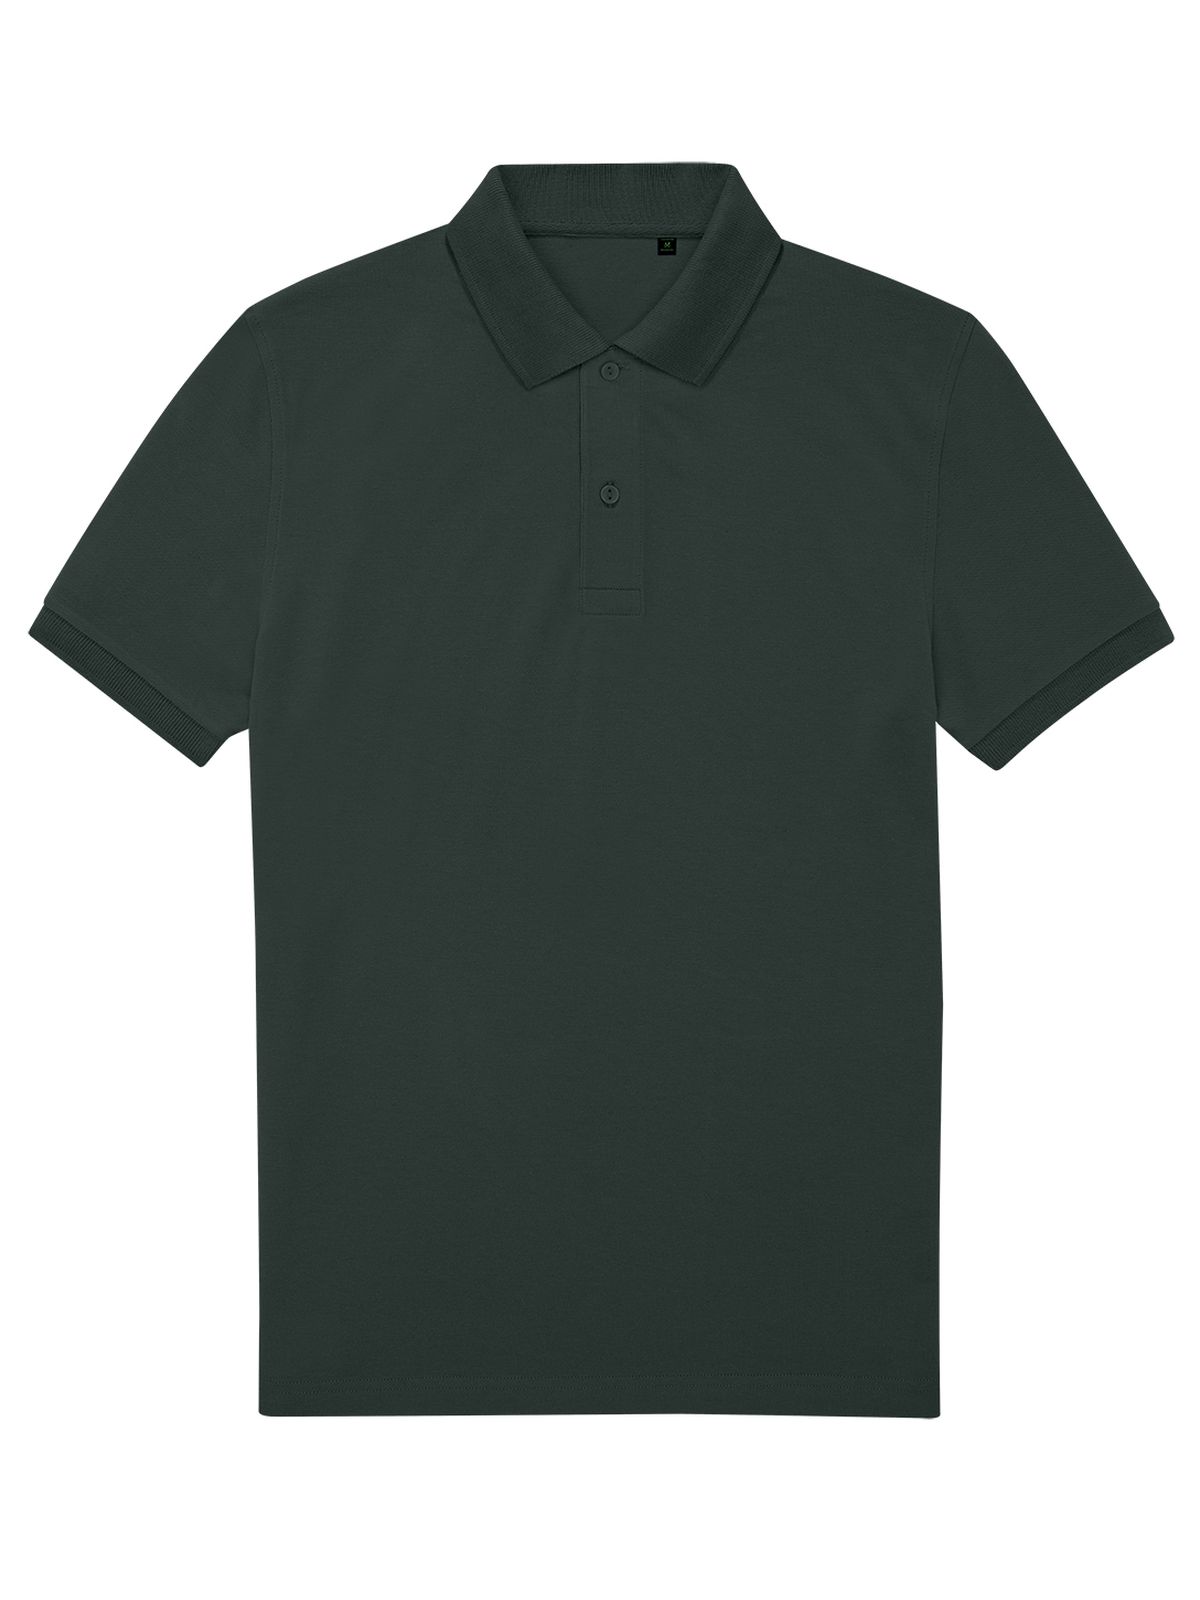 bc-my-eco-polo-65-35-dark-forest.webp